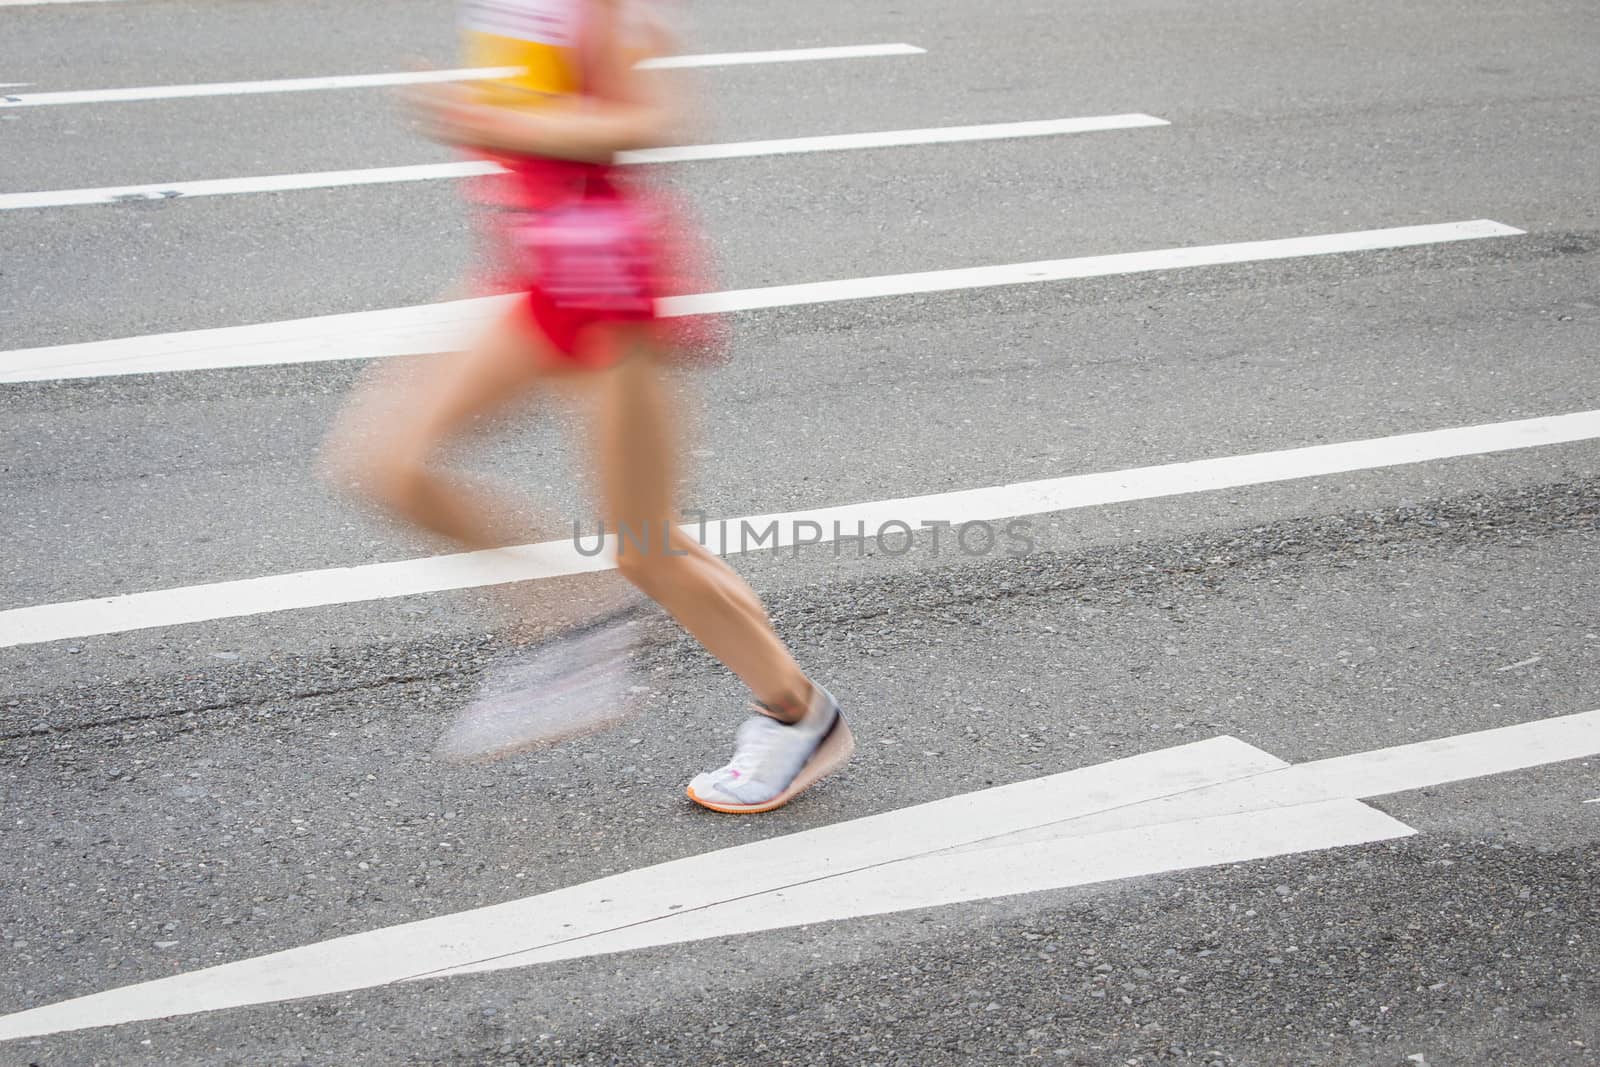 Marathon runners on the Road. Motion blurred